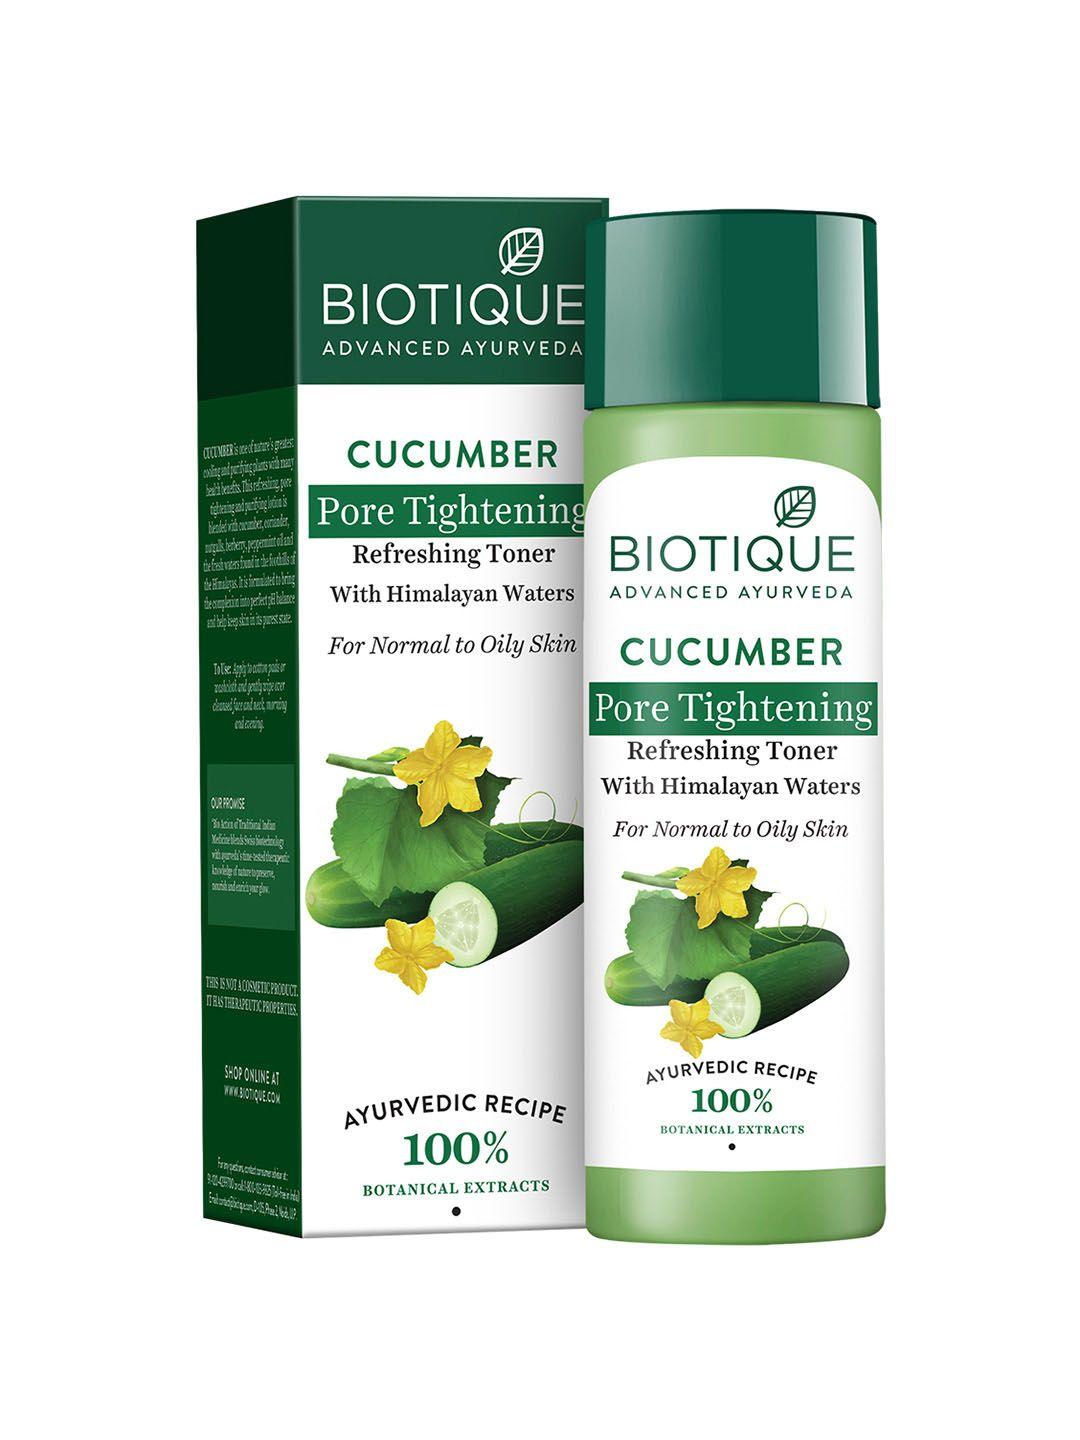 biotique cucumber pore tightening refreshing toner with himalayan waters - 120ml